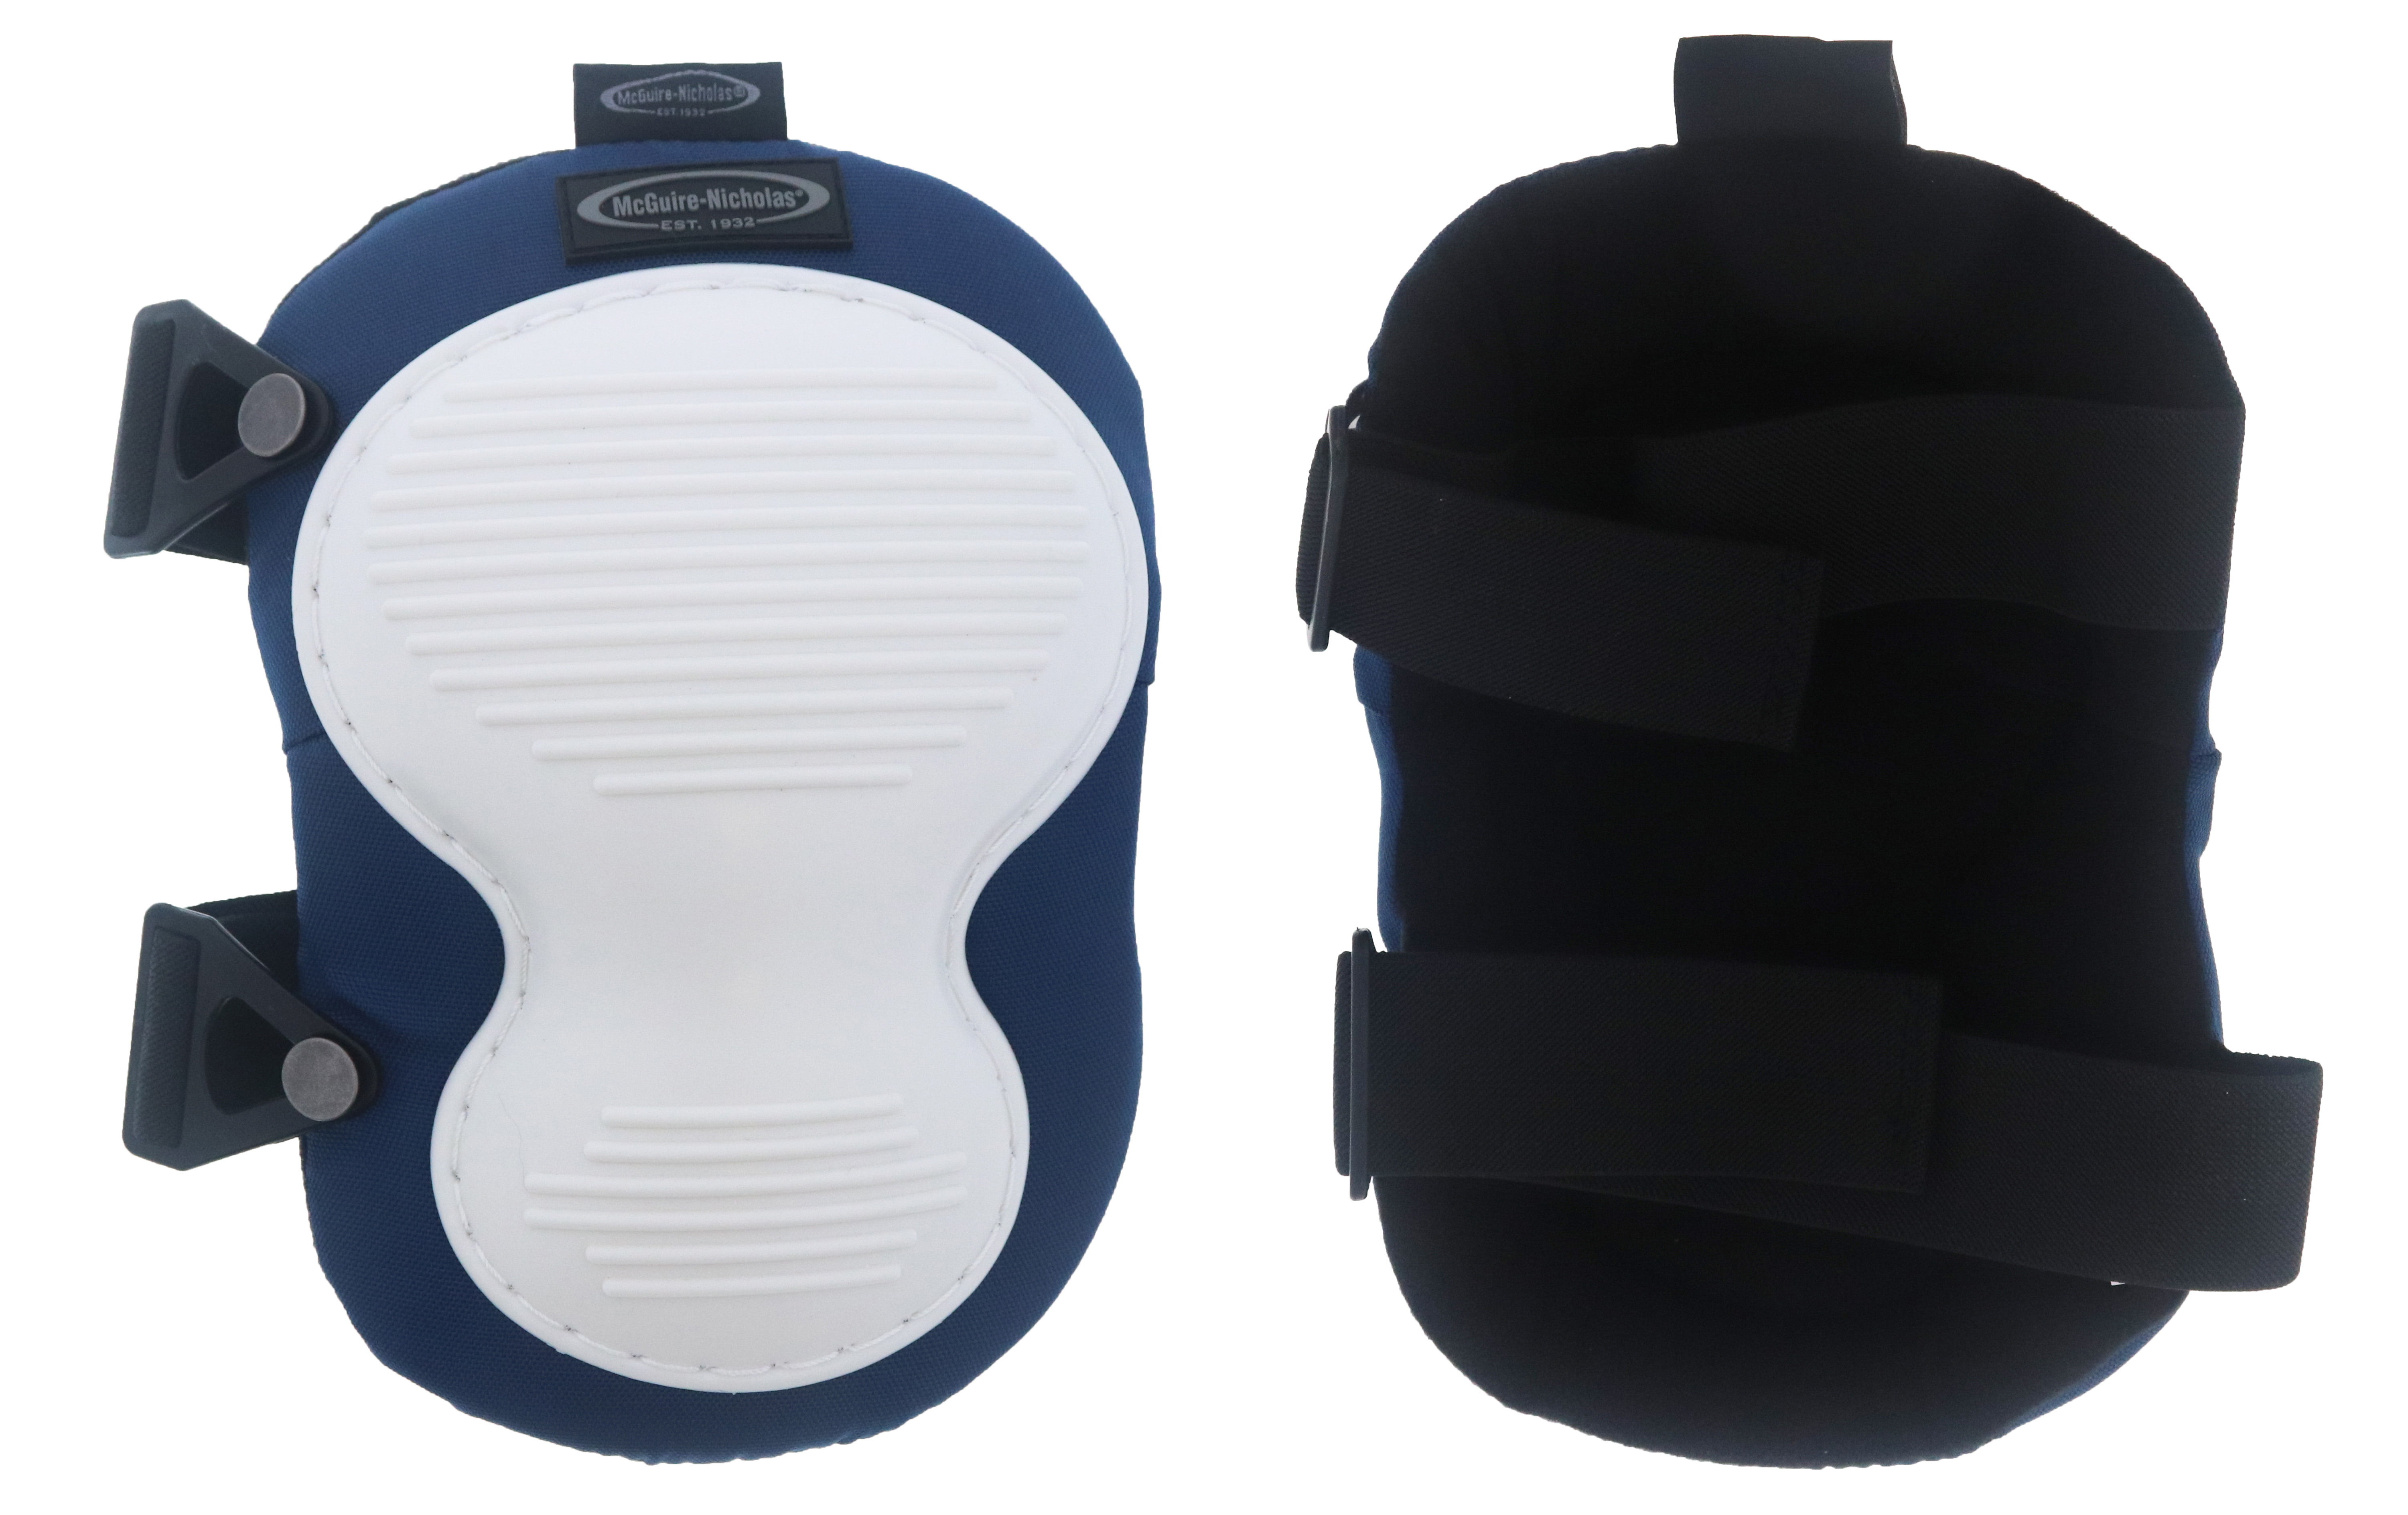 McGuire Nicholas 353X 1 Non Marring Kneepads in Blue and White Color Combination